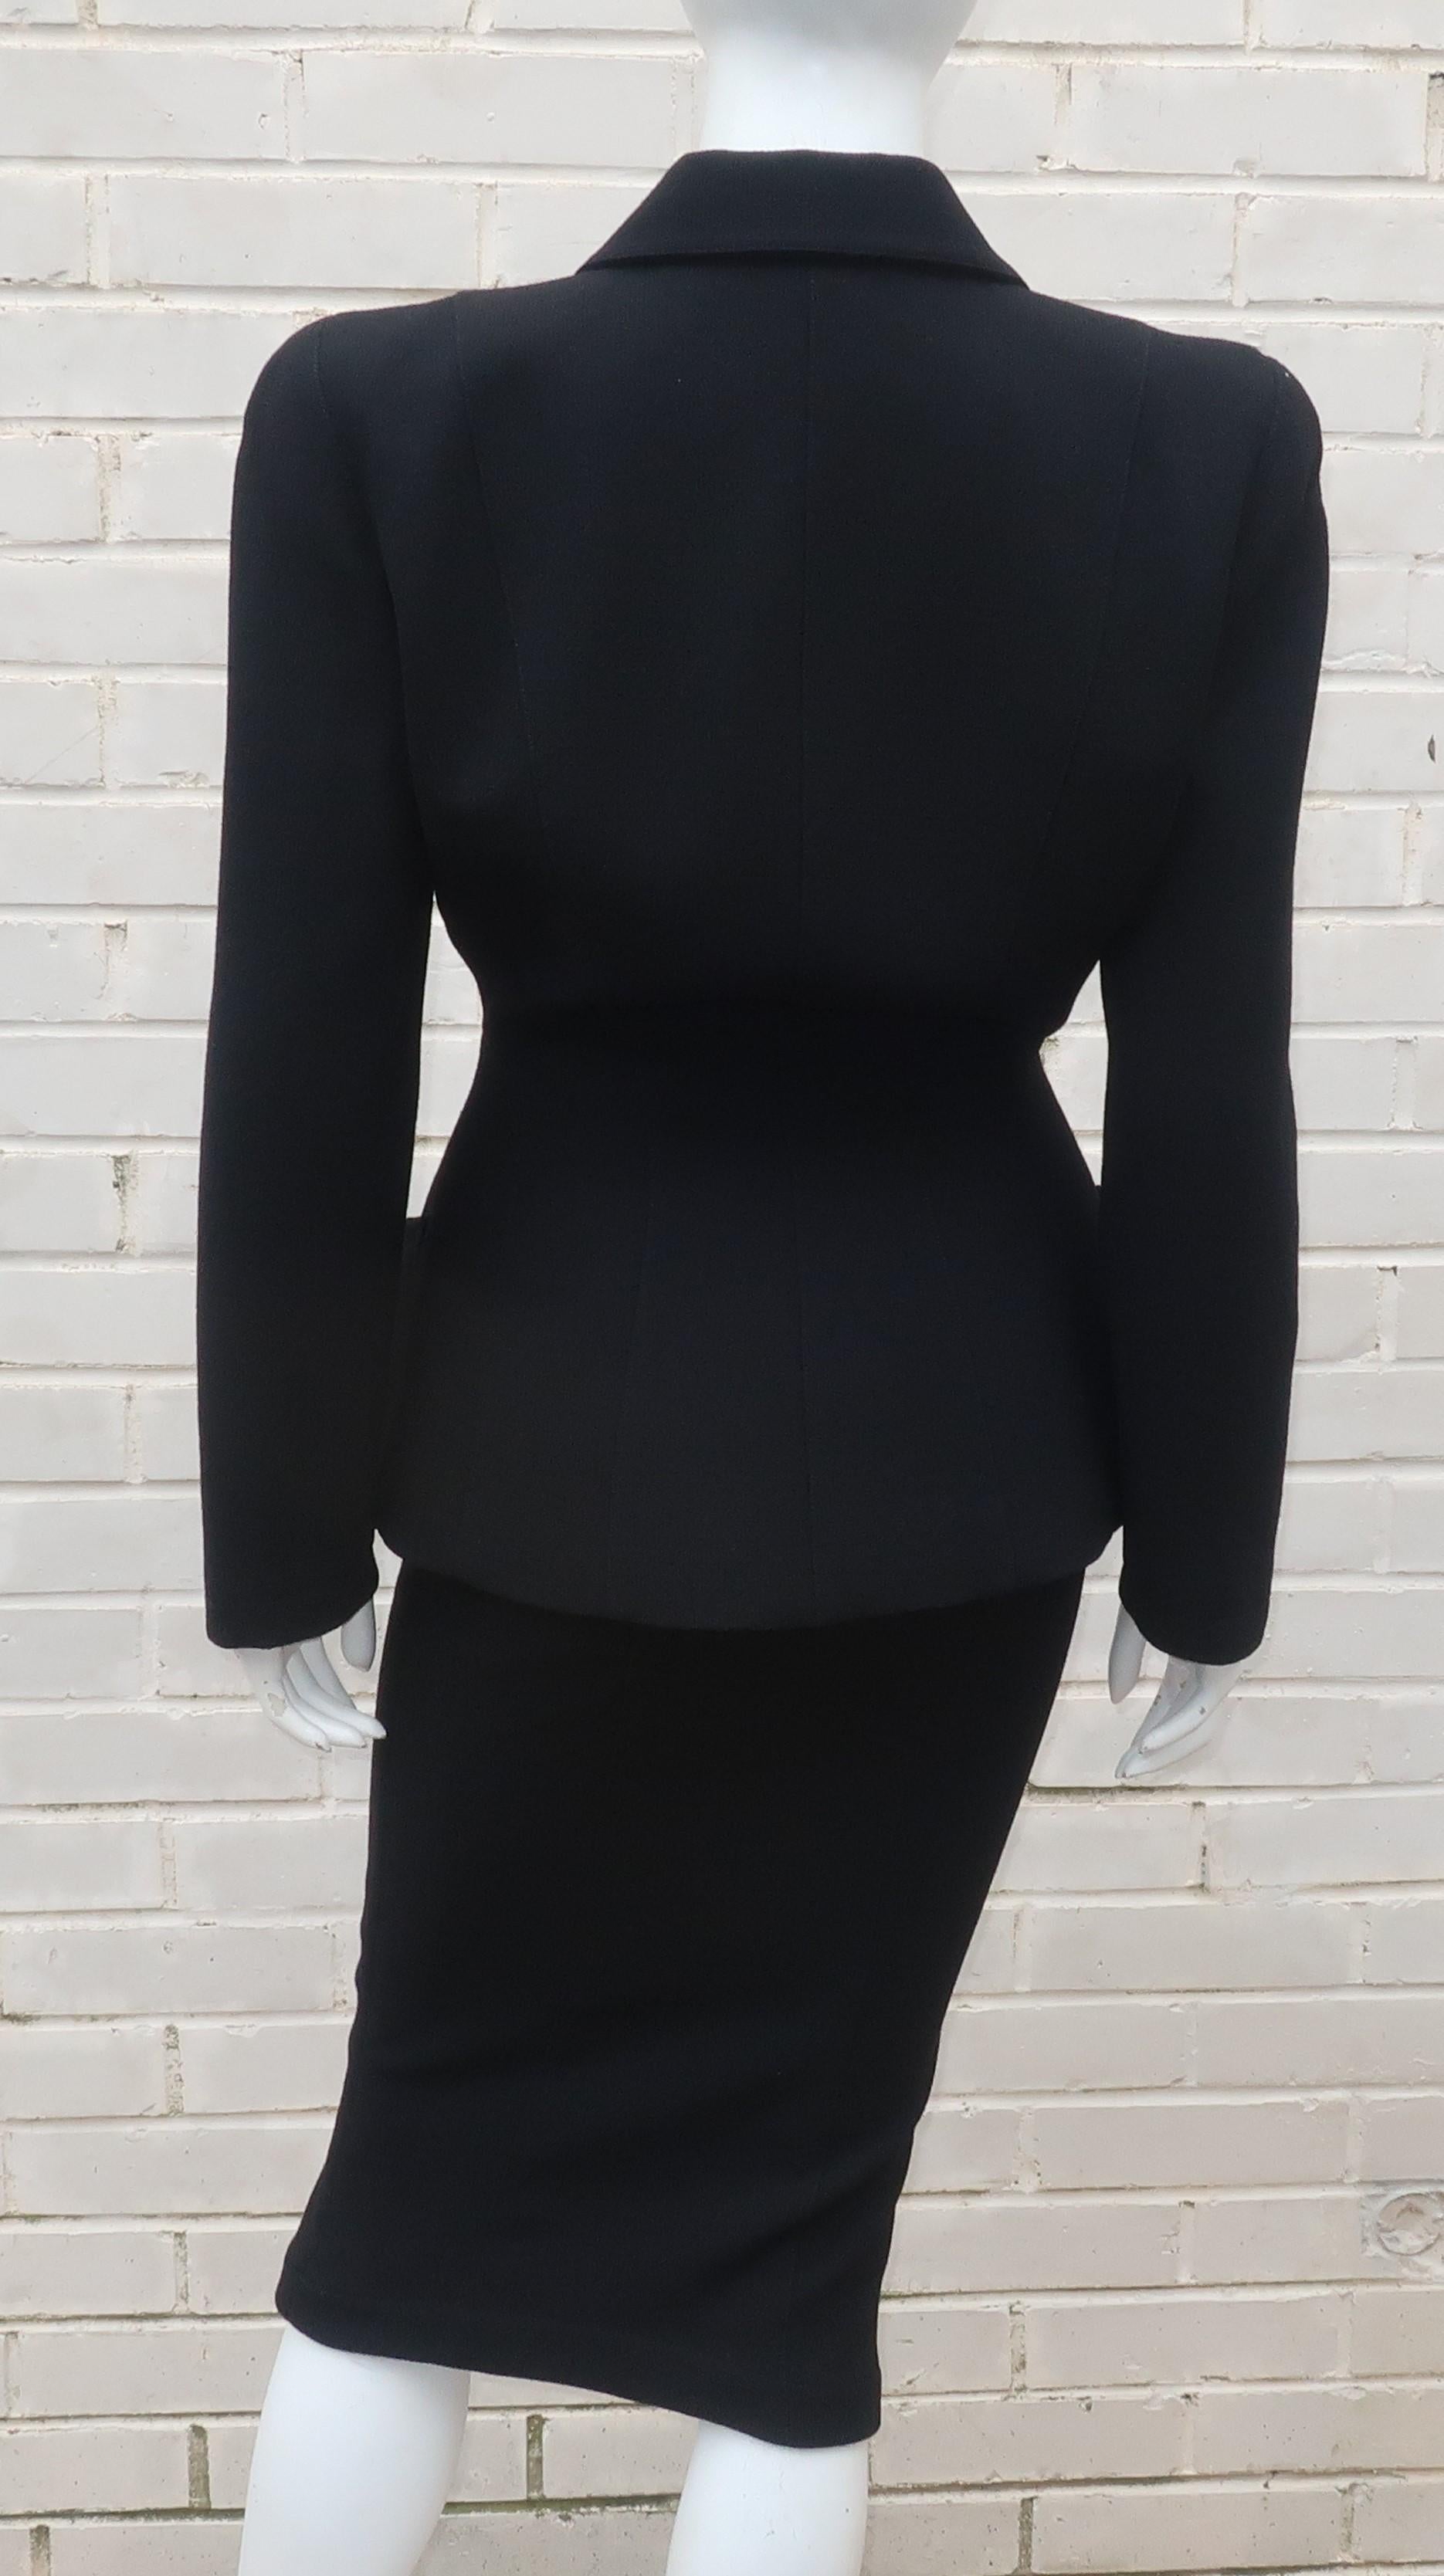 Thierry Mugler Black Skirt Suit With Star Buttons 2